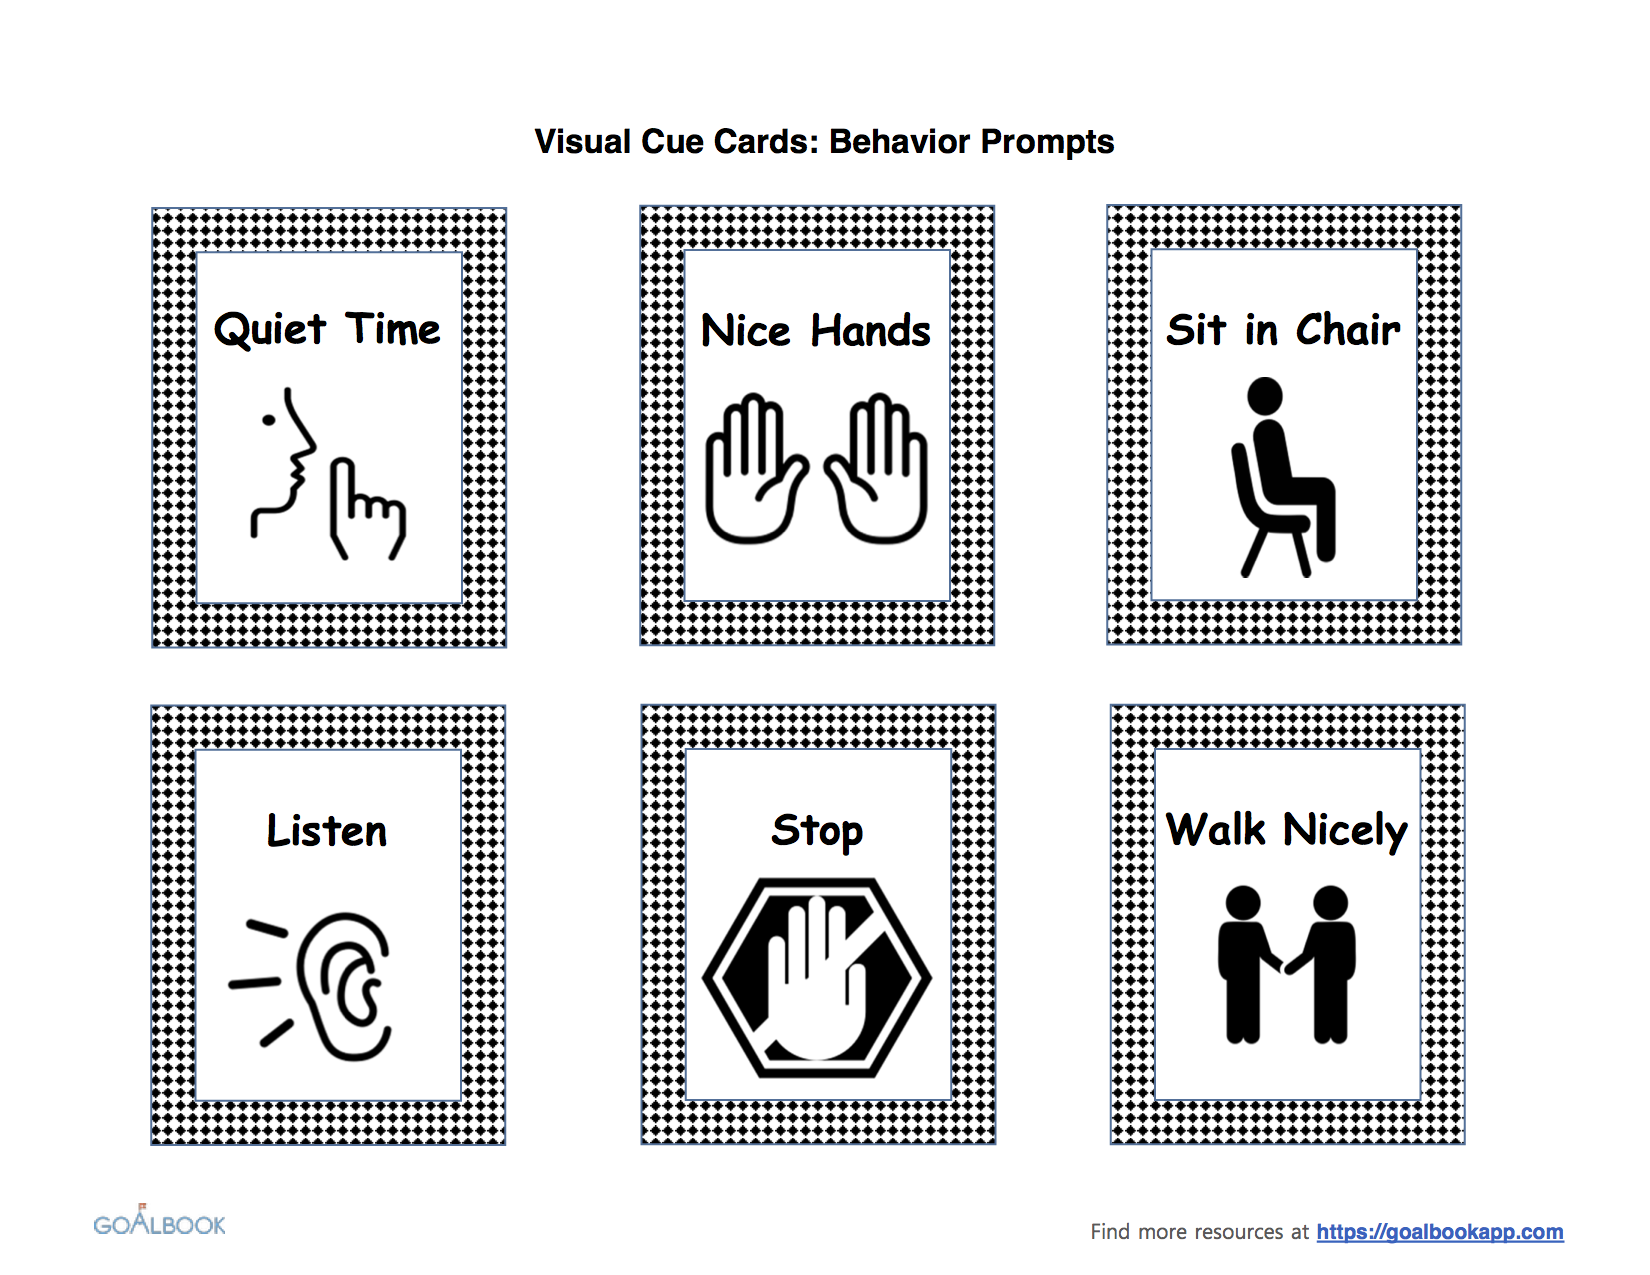 Visual cue cards for behaviour guidance of children.